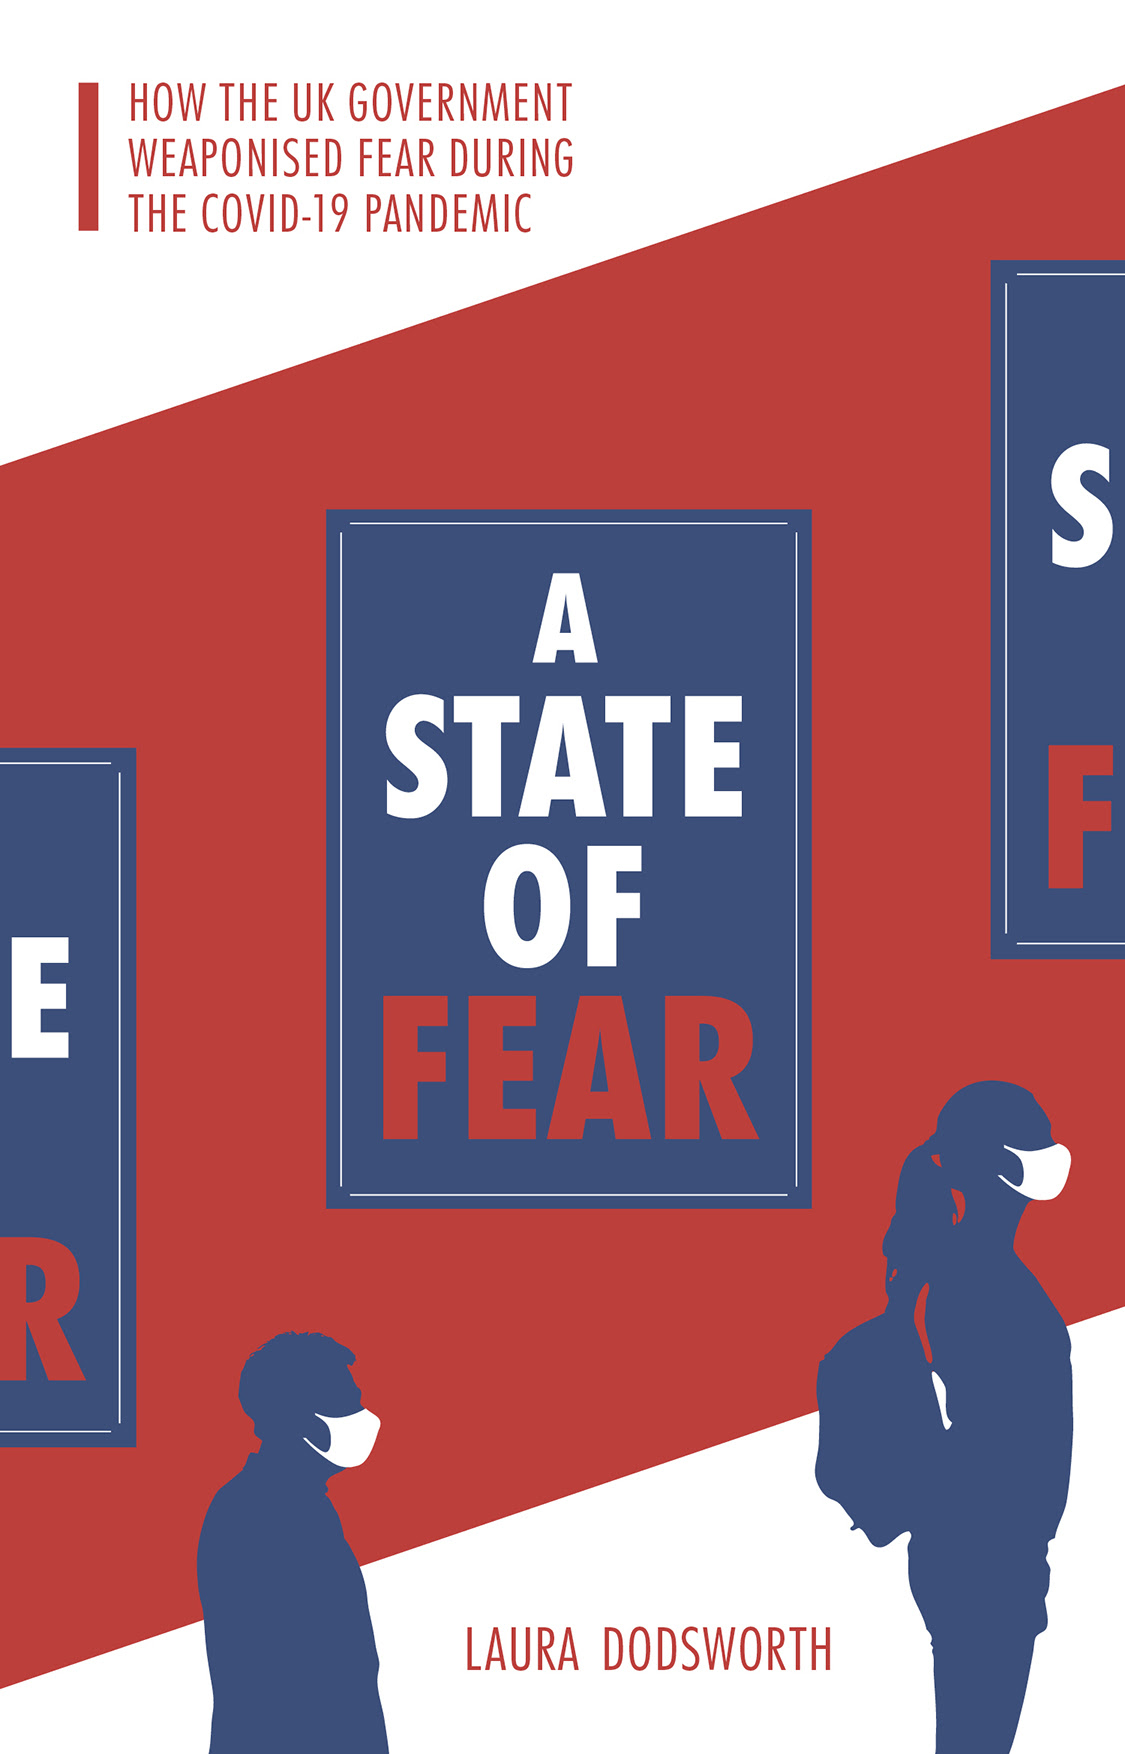 A State of Fear: how the UK government weaponised fear during the Covid-19 pandemic in Kindle/PDF/EPUB